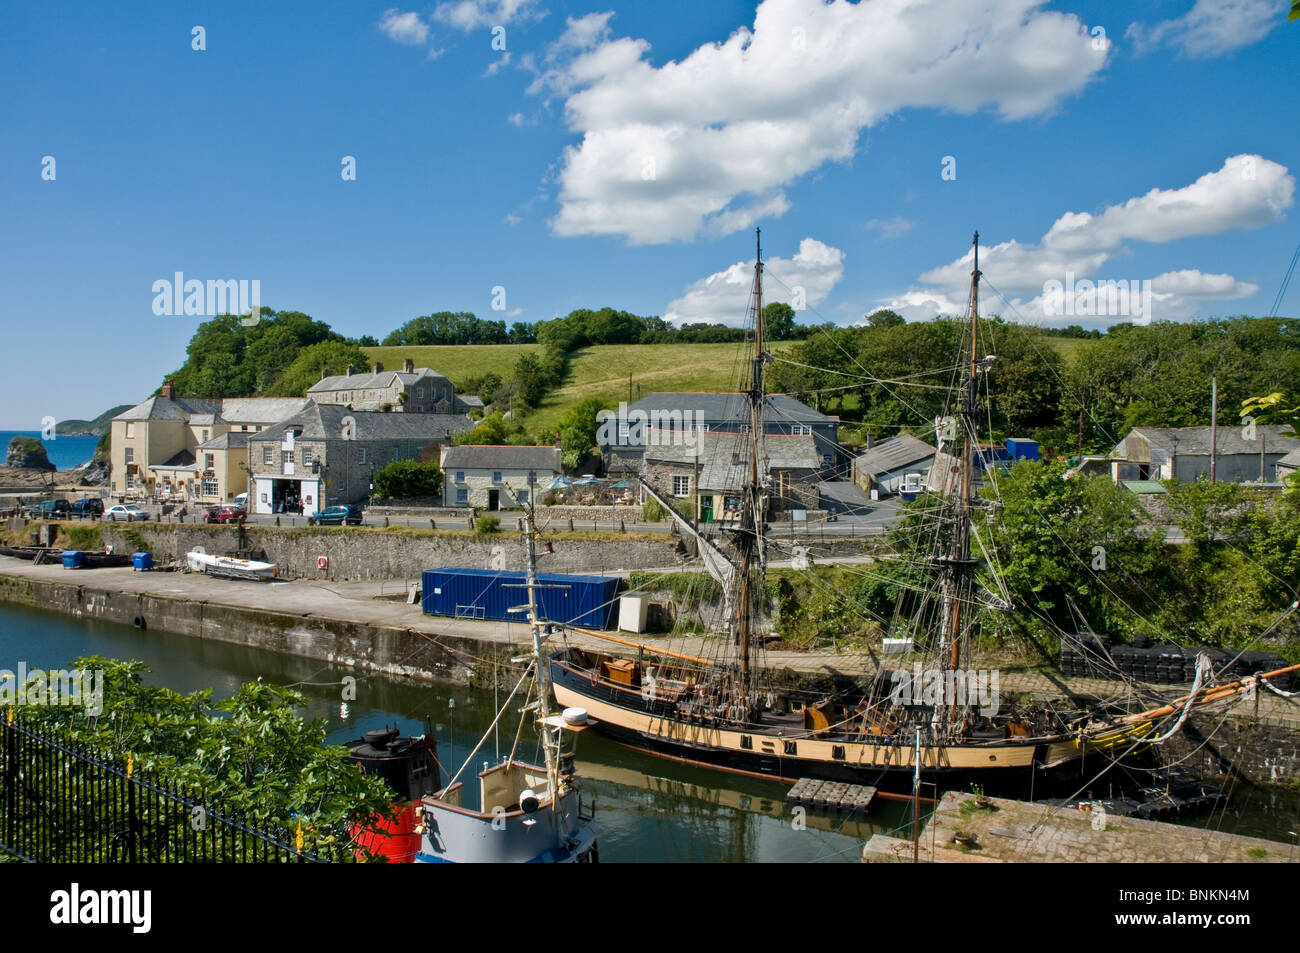 Sailing ship and other boats at old harbour Charlestown nr St. Austell Cornwall England Stock Photo